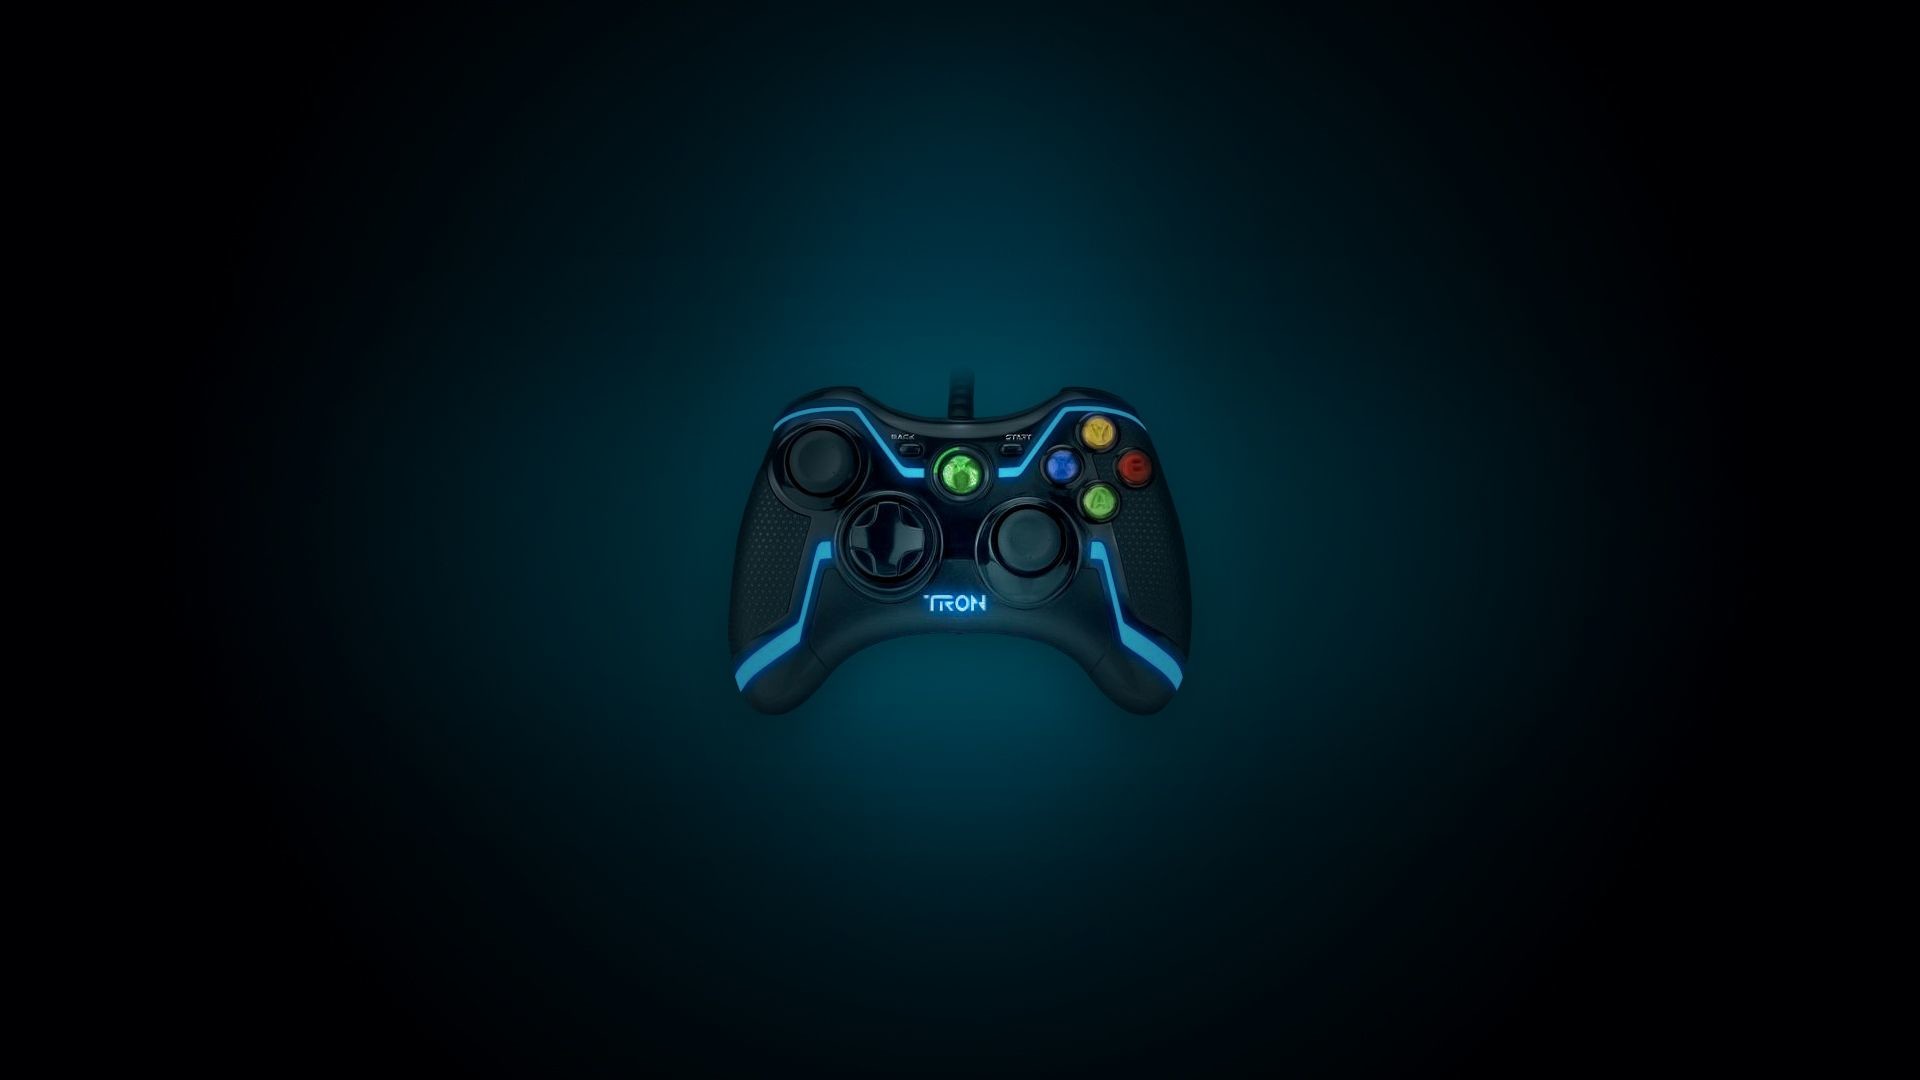 1920x1080 ... Download Video Game Controller Picture For Widescreen Wallpaper .